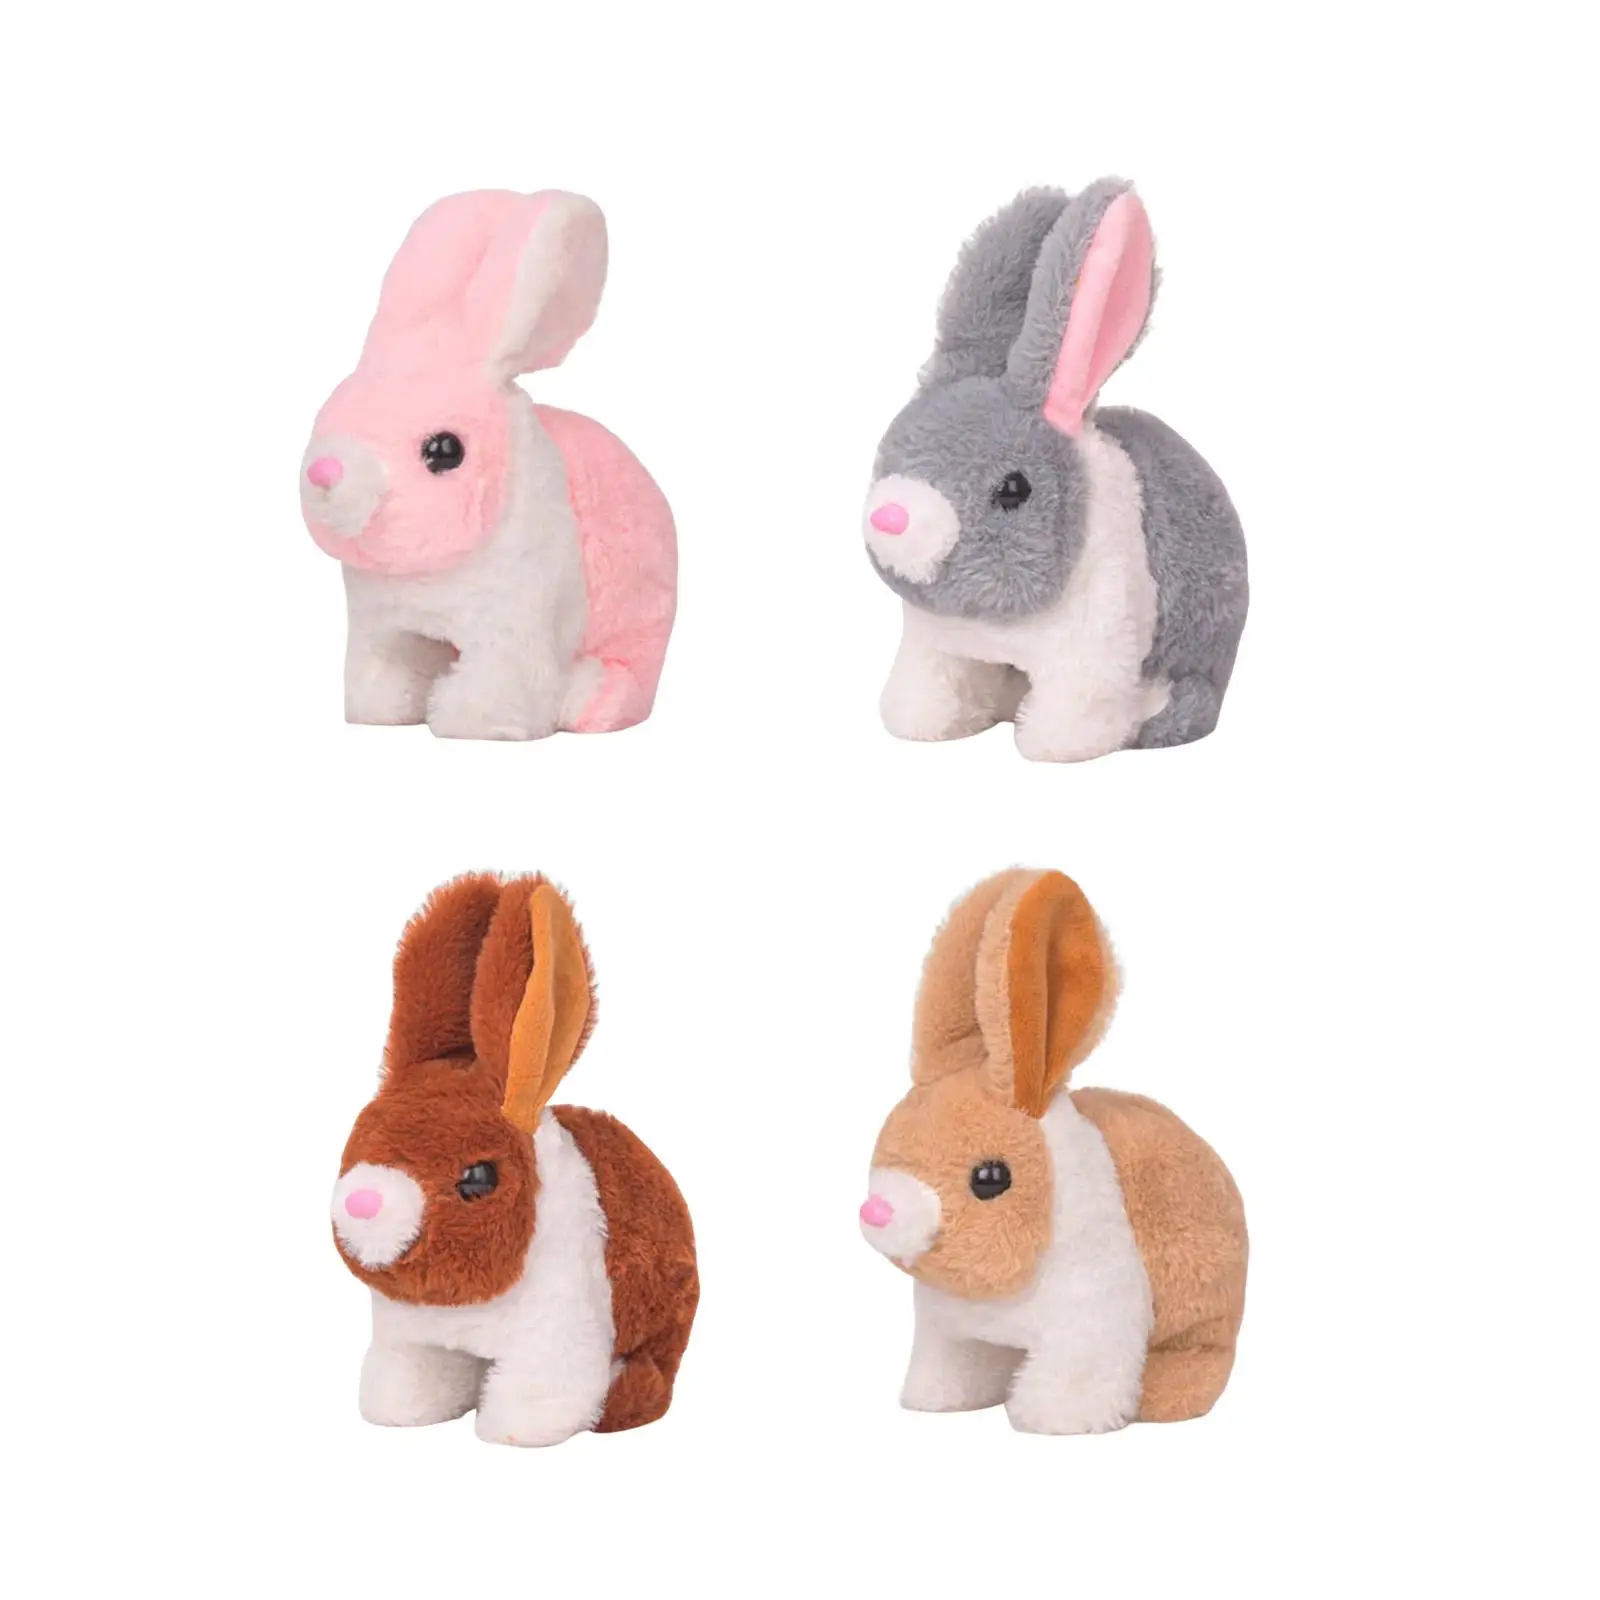 Electric Bunny Toys Educational, Adorable Easter Plush to,y Novelty Electronic